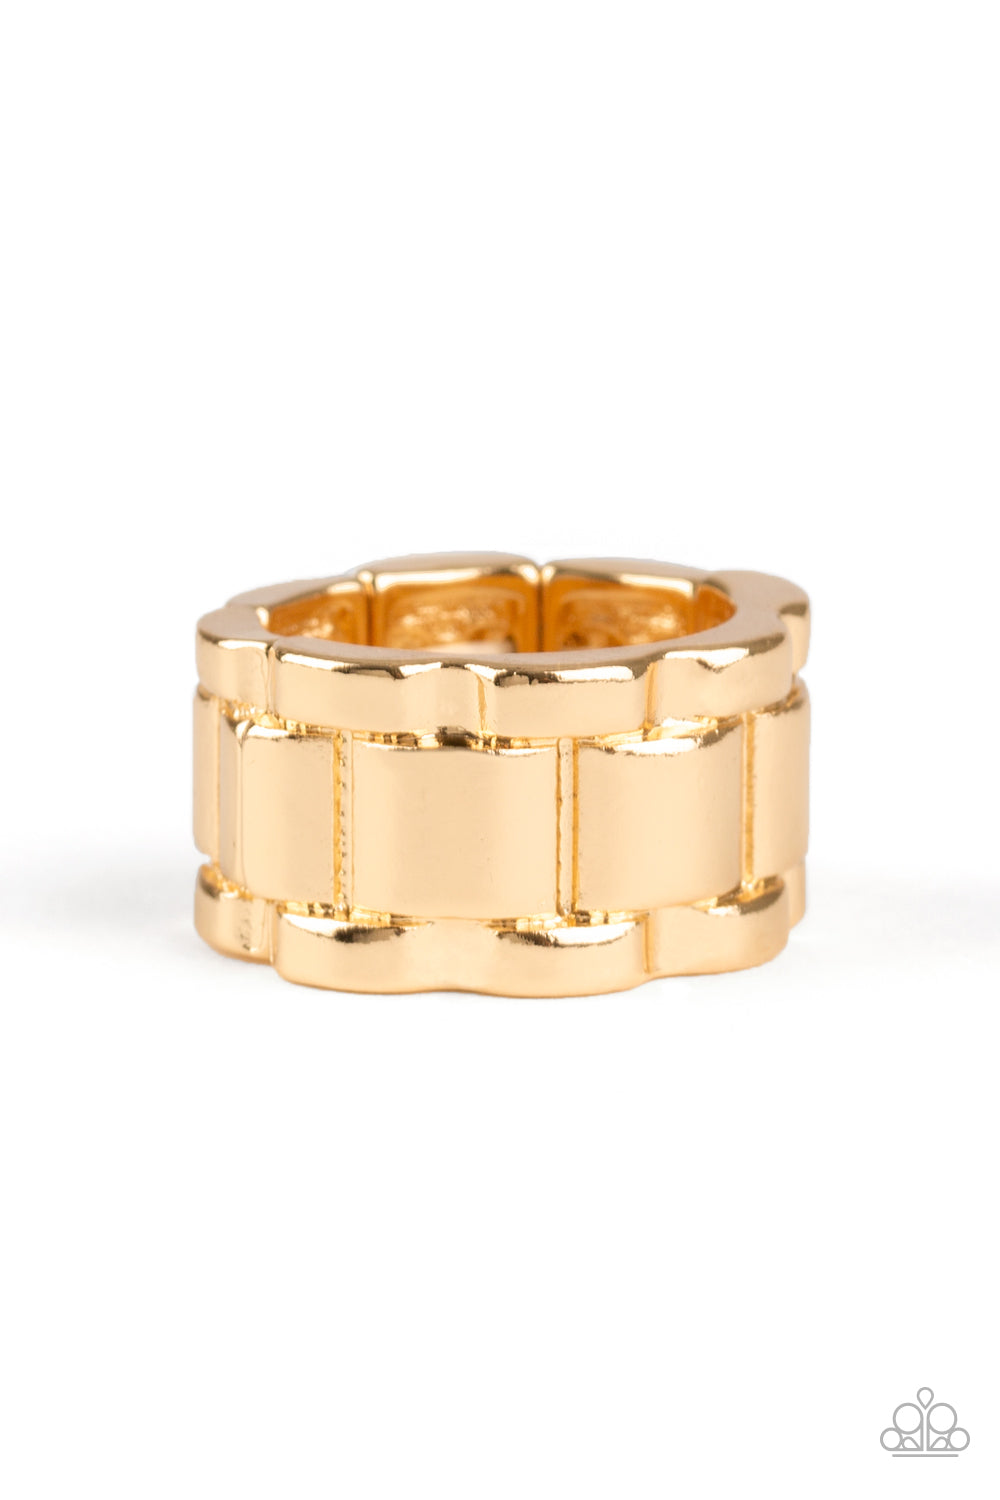 pittmanbling-and-jewelry-inc-presentsmodern-machinery-gold-ring-paparazzi-accessories